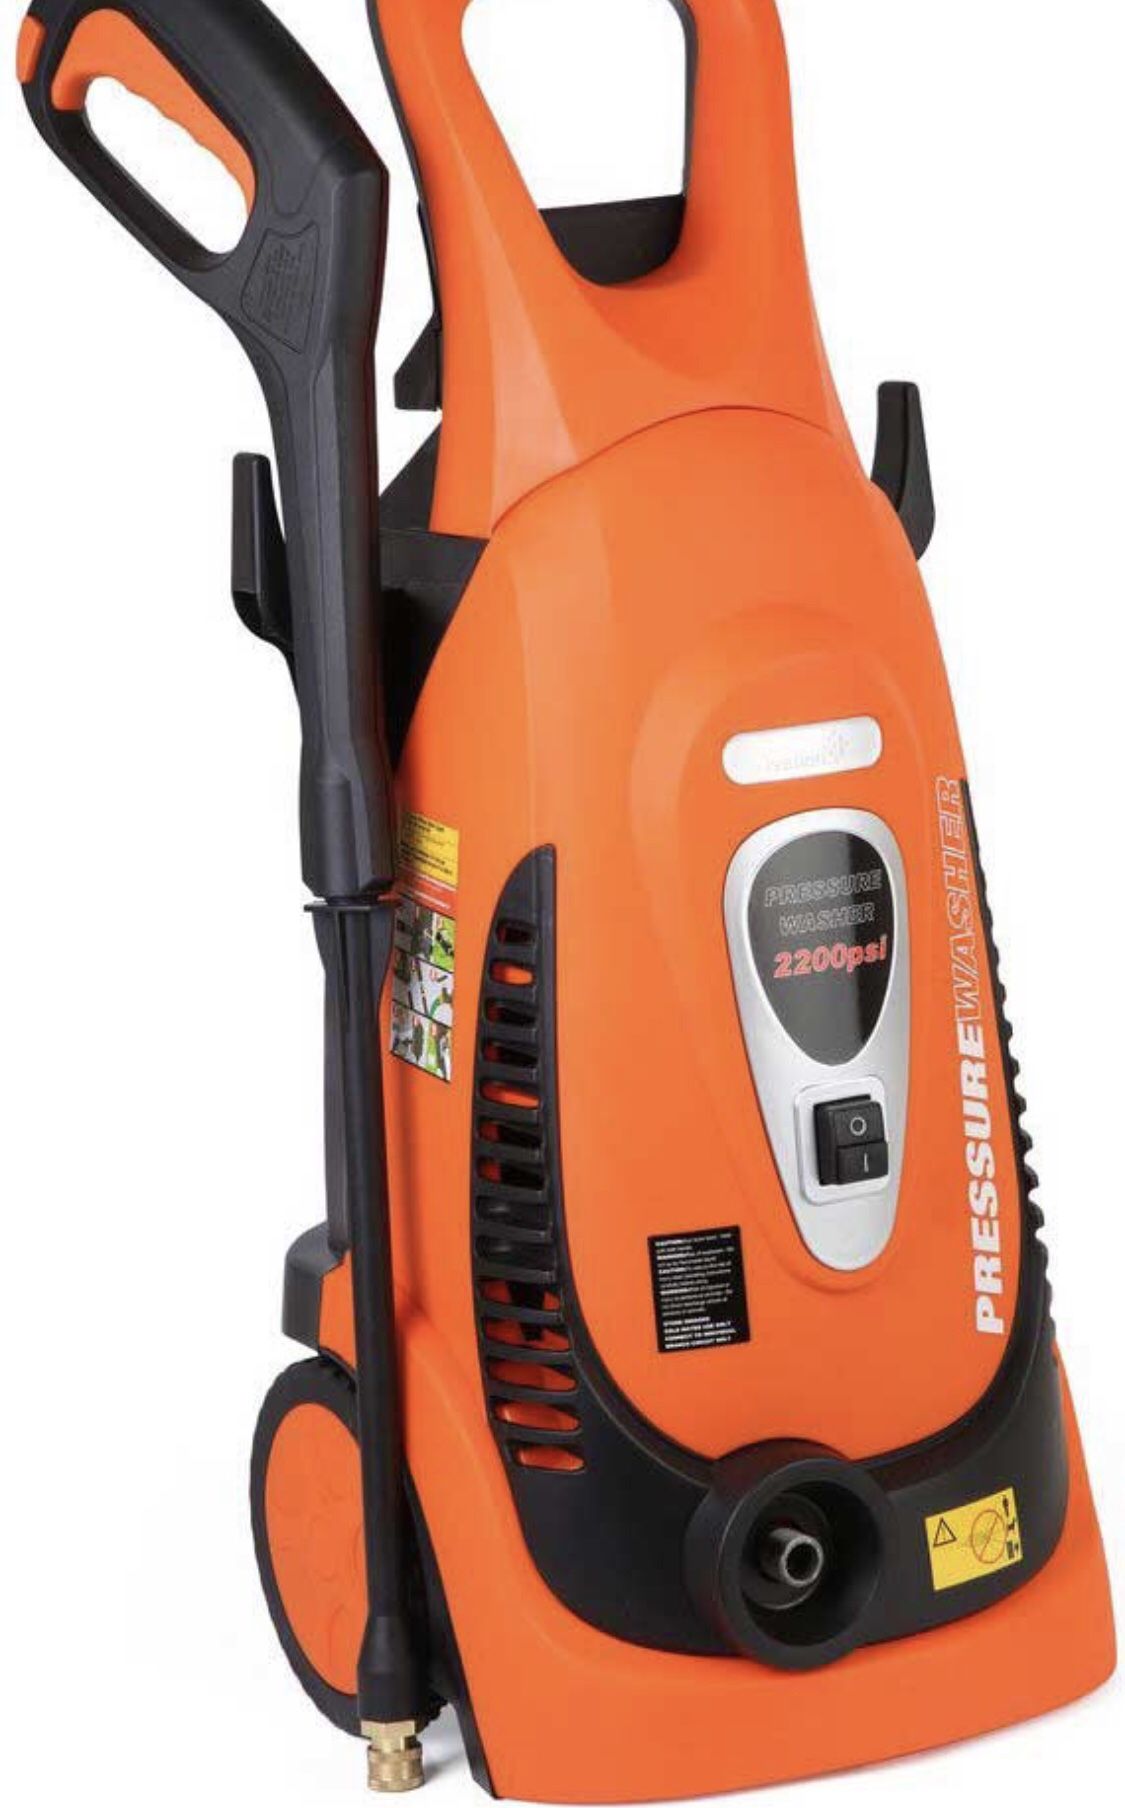 Ivation Electric Pressure Washer - 2200 PSI